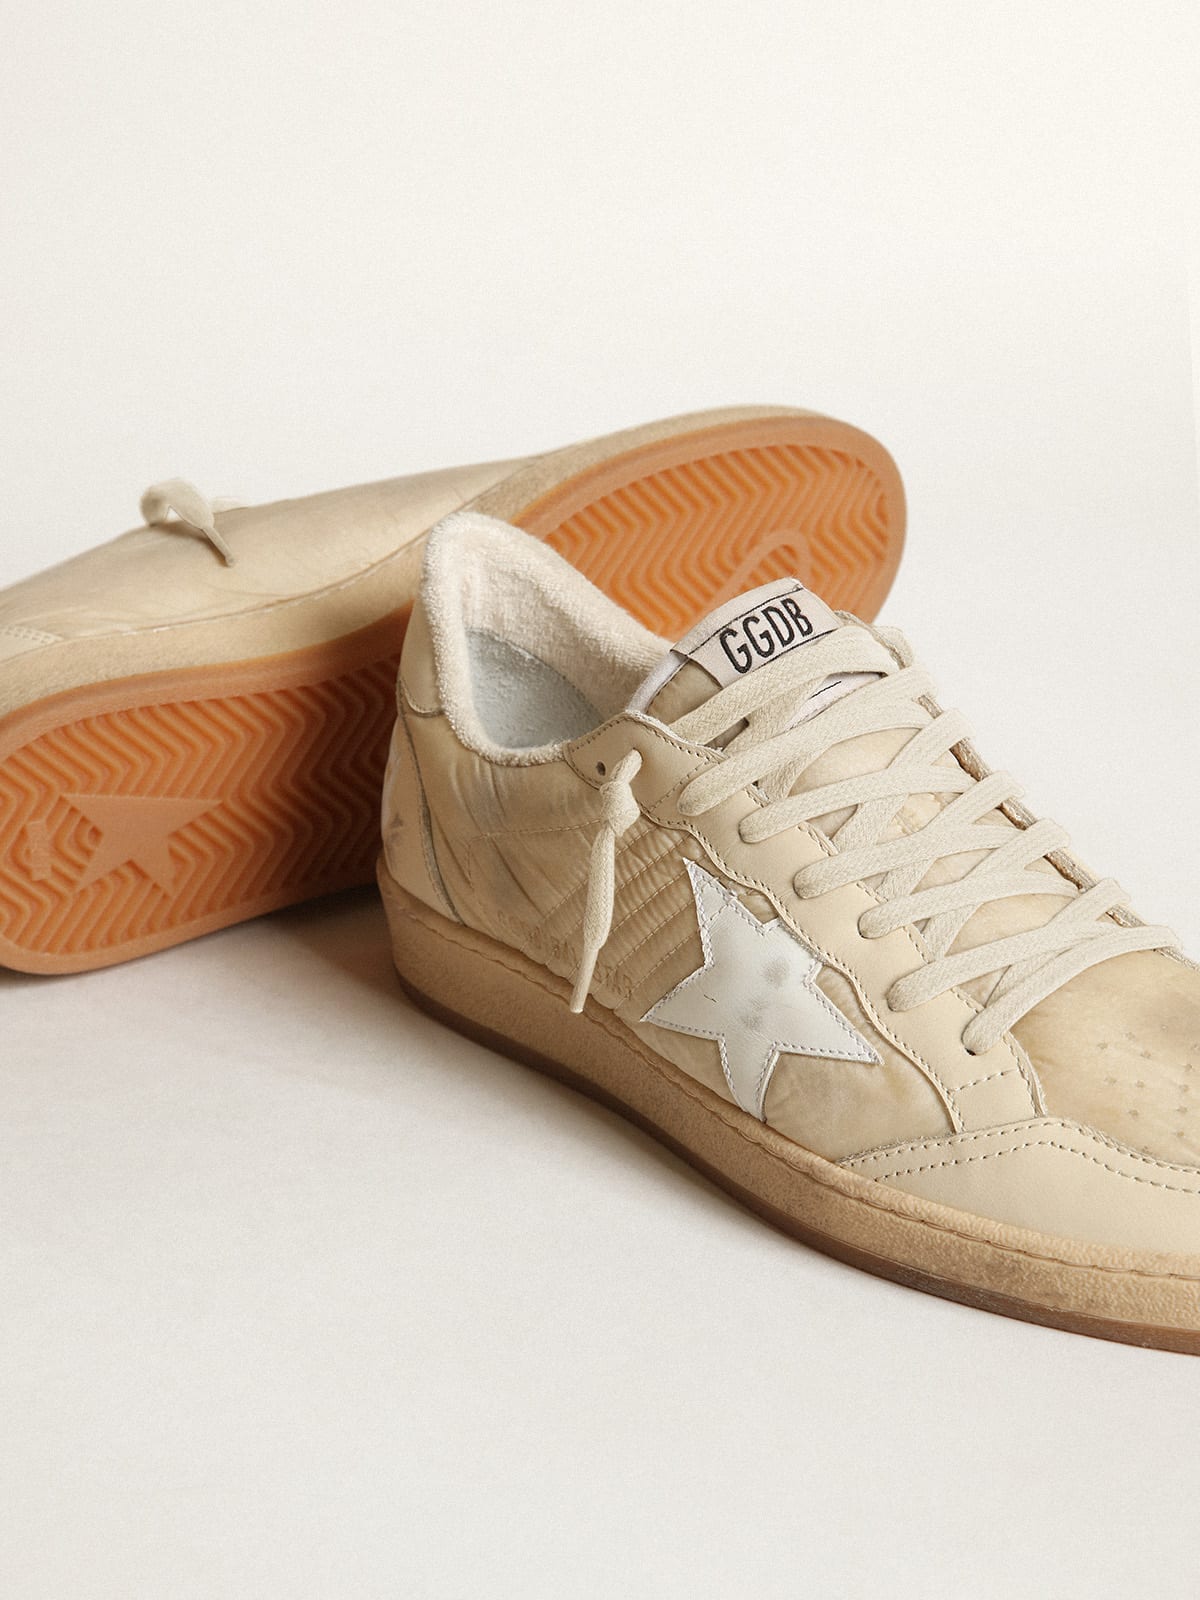 Golden Goose - Women’s Ball Star sneakers in milk-white nylon with white leather star and milk-white leather heel tab in 